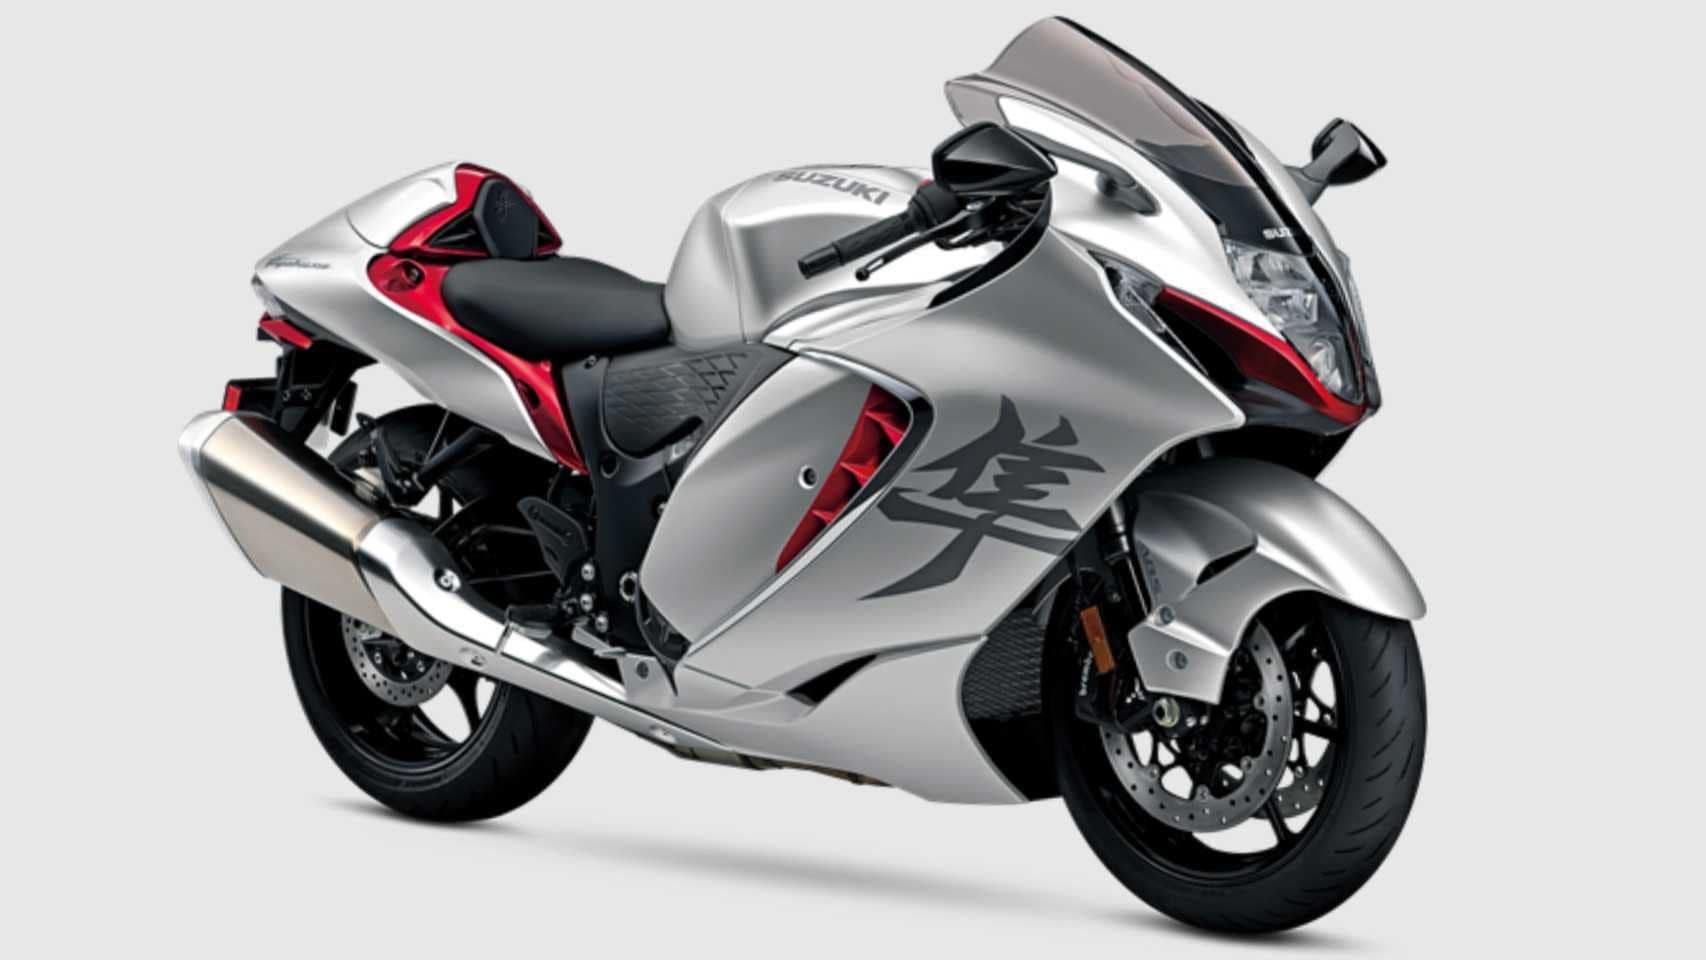 Suzuki claims the new Hayabusa’s drag coefficient is among the best in the world for street-legal motorcycles. Image: Suzuki